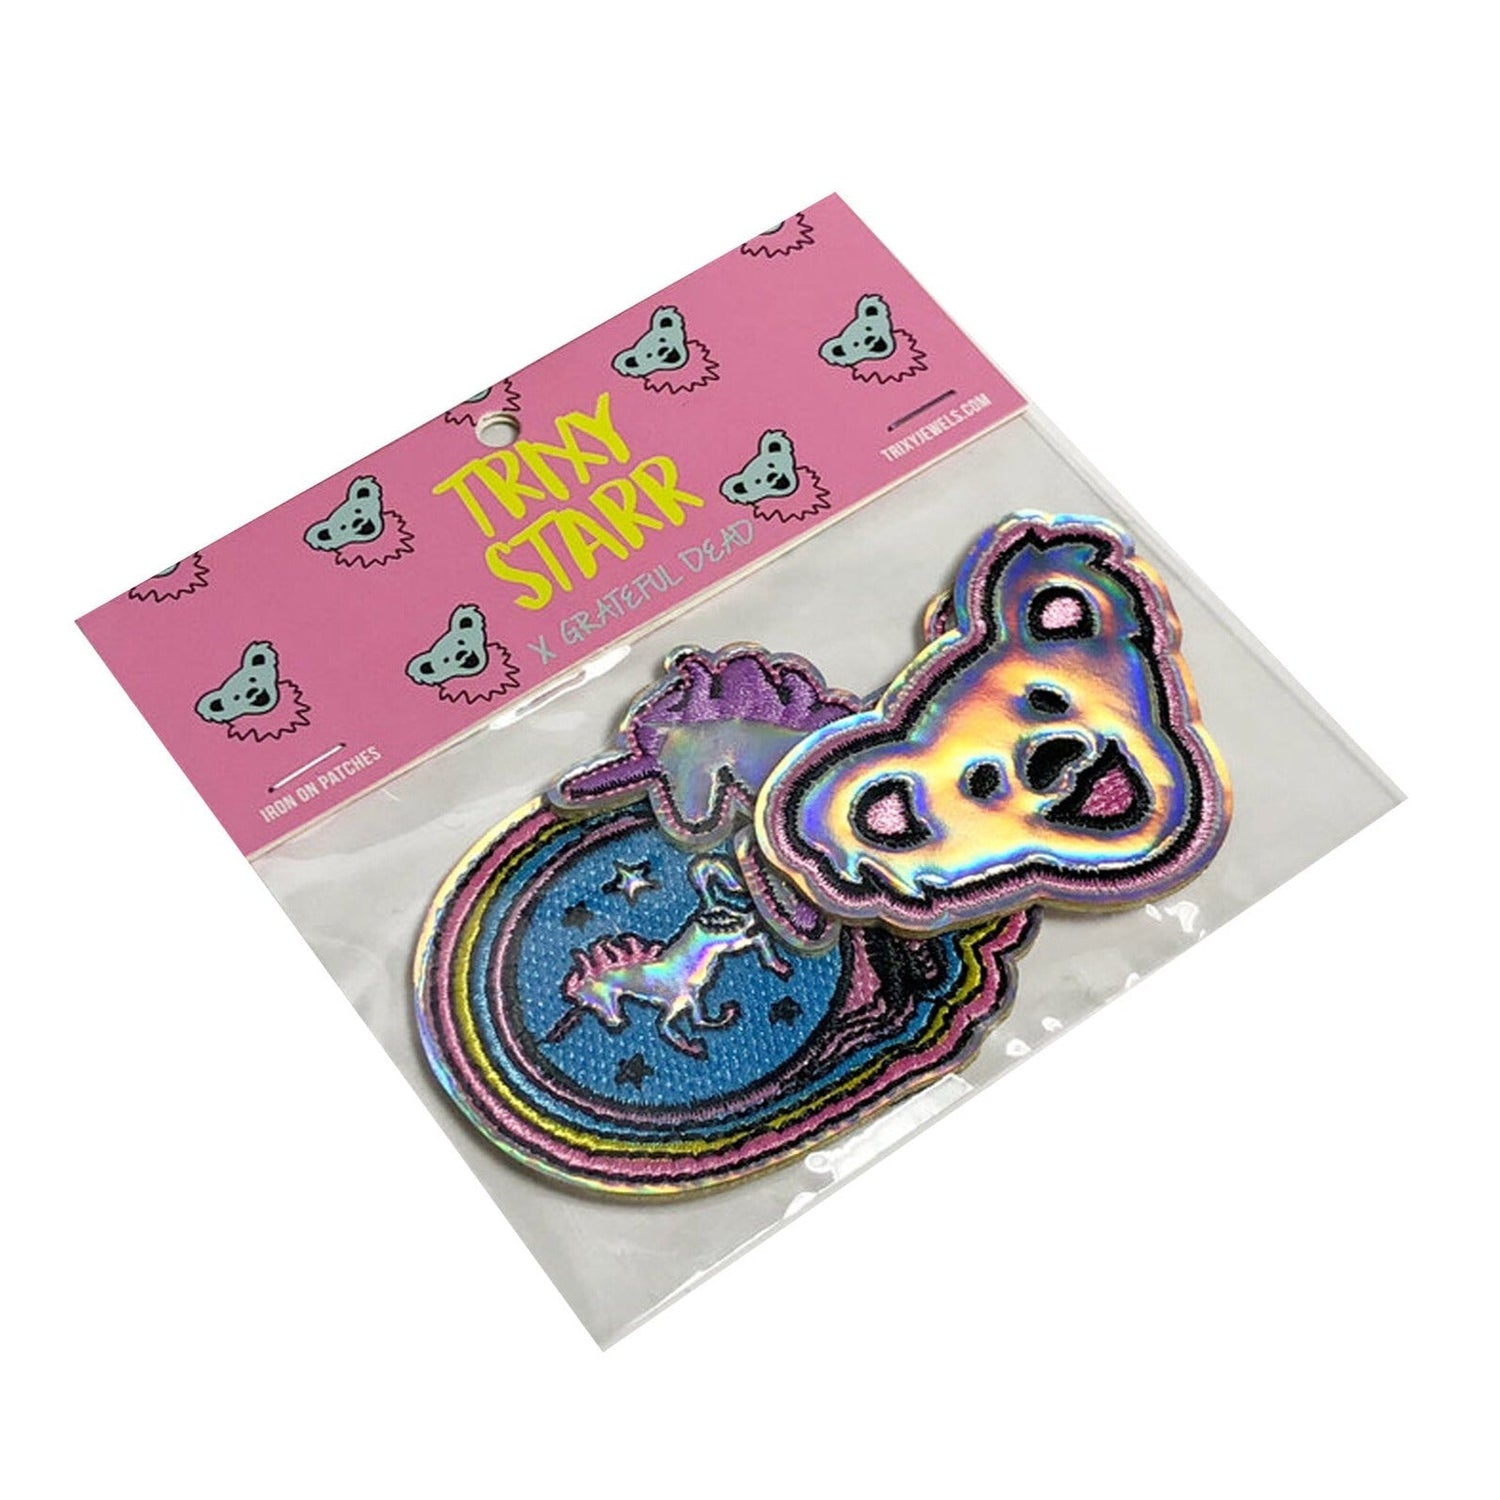 Buy Trixy Starr x Grateful Dead Iron On Patches at Spoiled Brat  Online - UK online Fashion &amp; lifestyle boutique